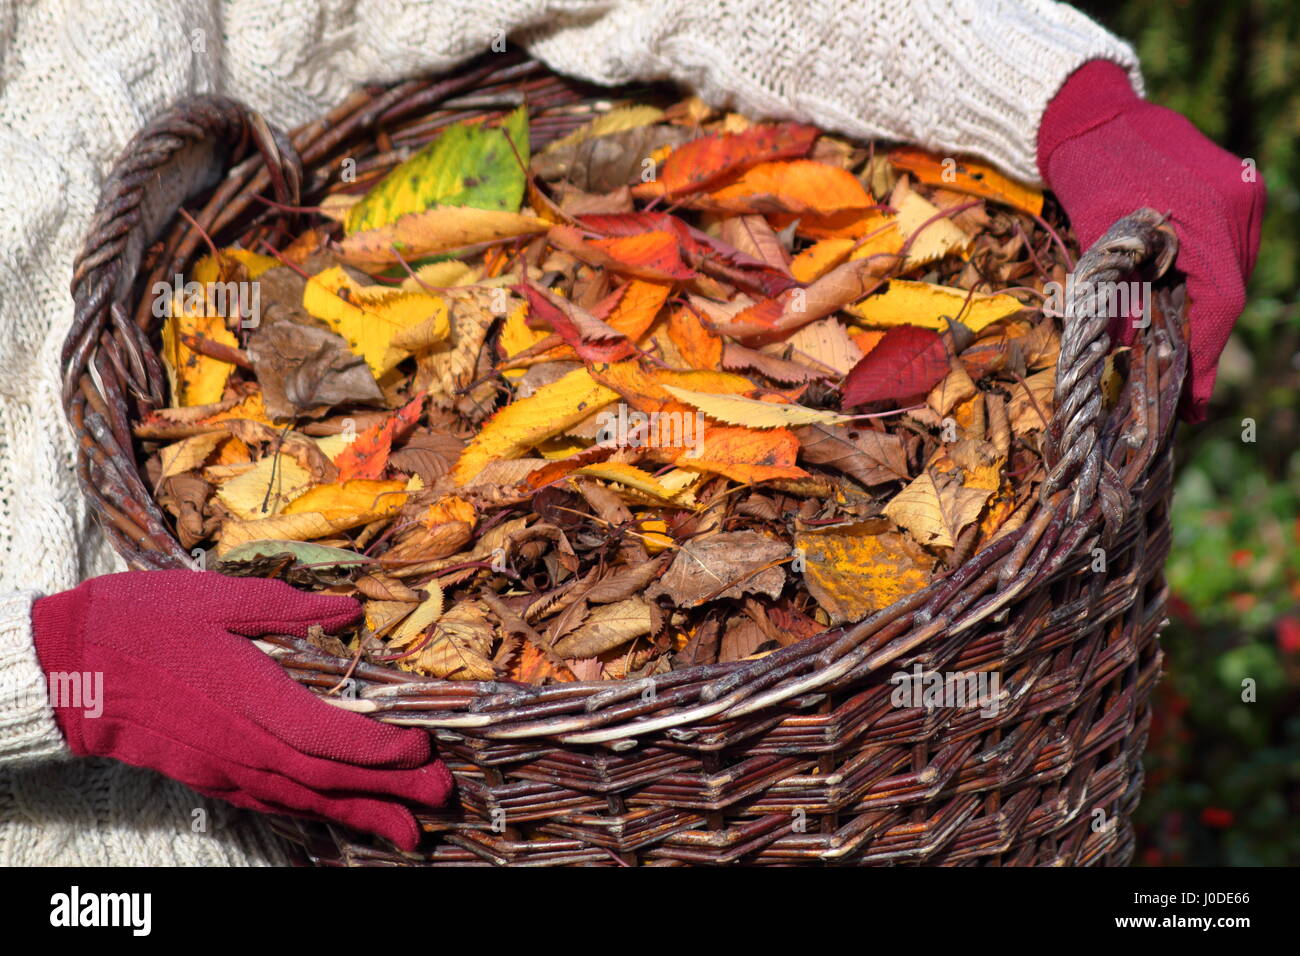 A female gardener carries ornamental cherry tree leaves (prunus) gathered from an English garden lawn in a basket - autumn gardening task Stock Photo